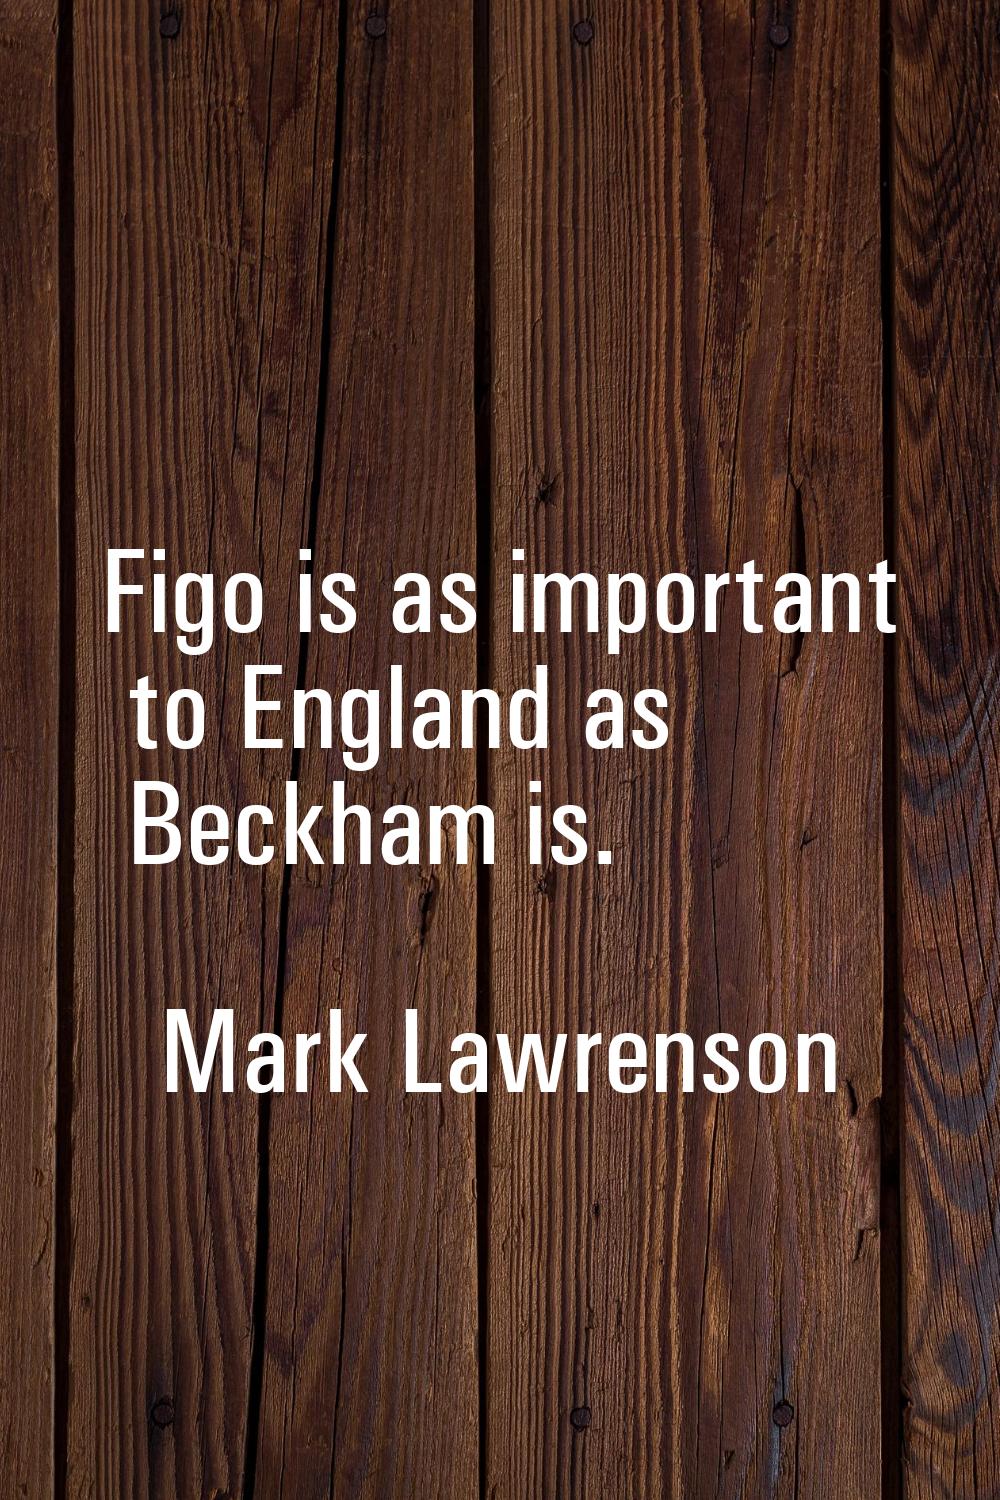 Figo is as important to England as Beckham is.